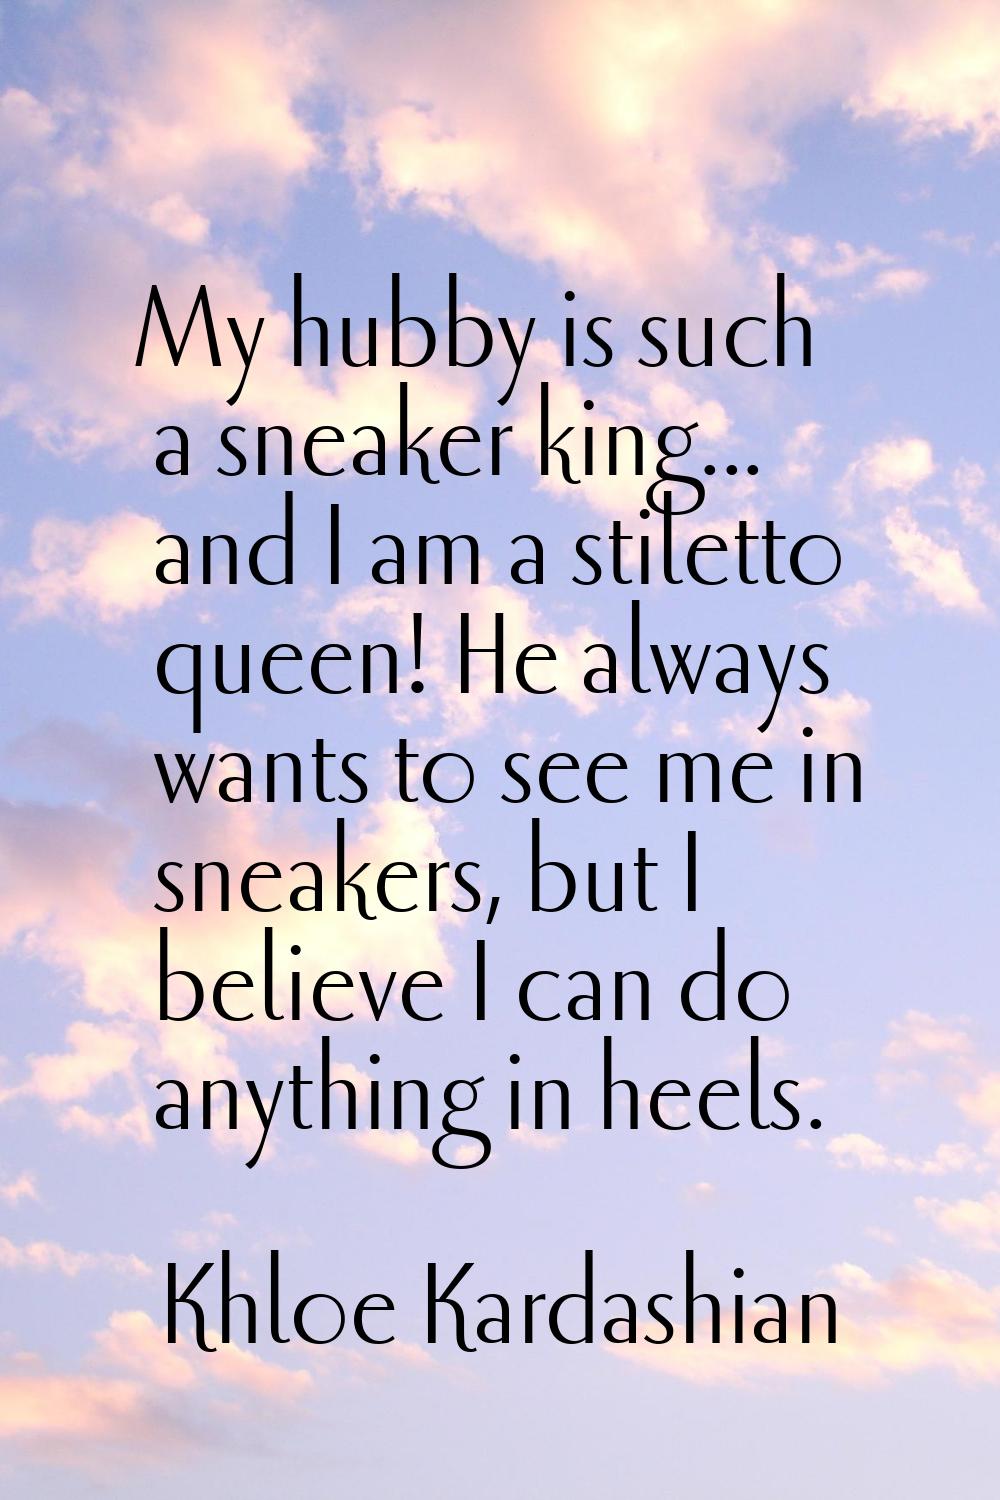 My hubby is such a sneaker king... and I am a stiletto queen! He always wants to see me in sneakers